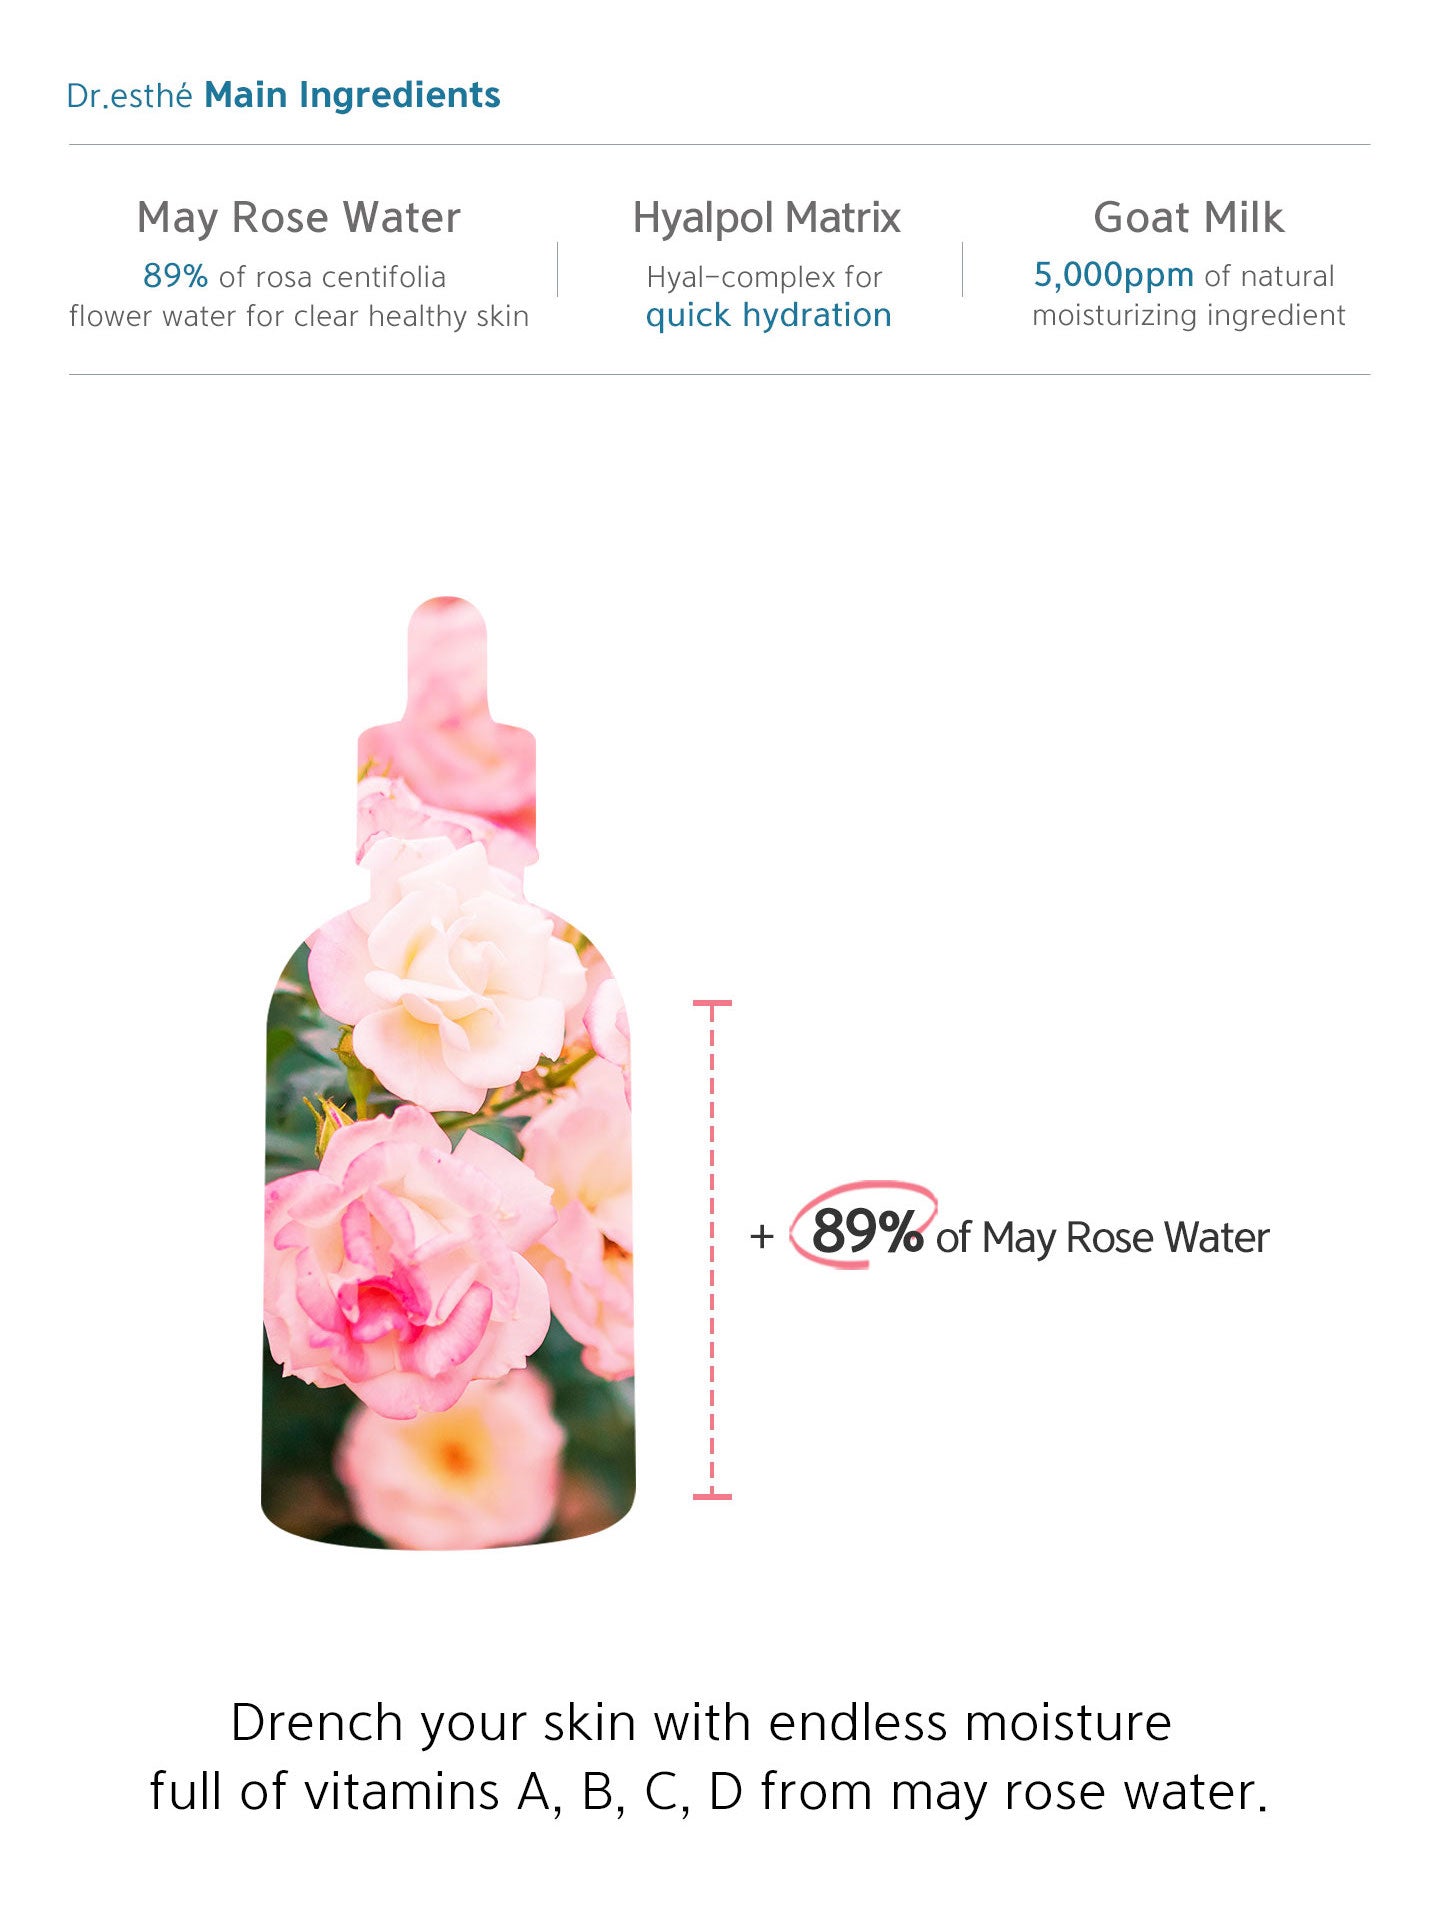 89% of rosa centifolia flower water for clear healthy skin. Hyal-complex for quick hydration. 5000ppm of natural moisturizing ingredient. Drench your skin with endless moisture full of vitamins A, B, C, D from may rose water.